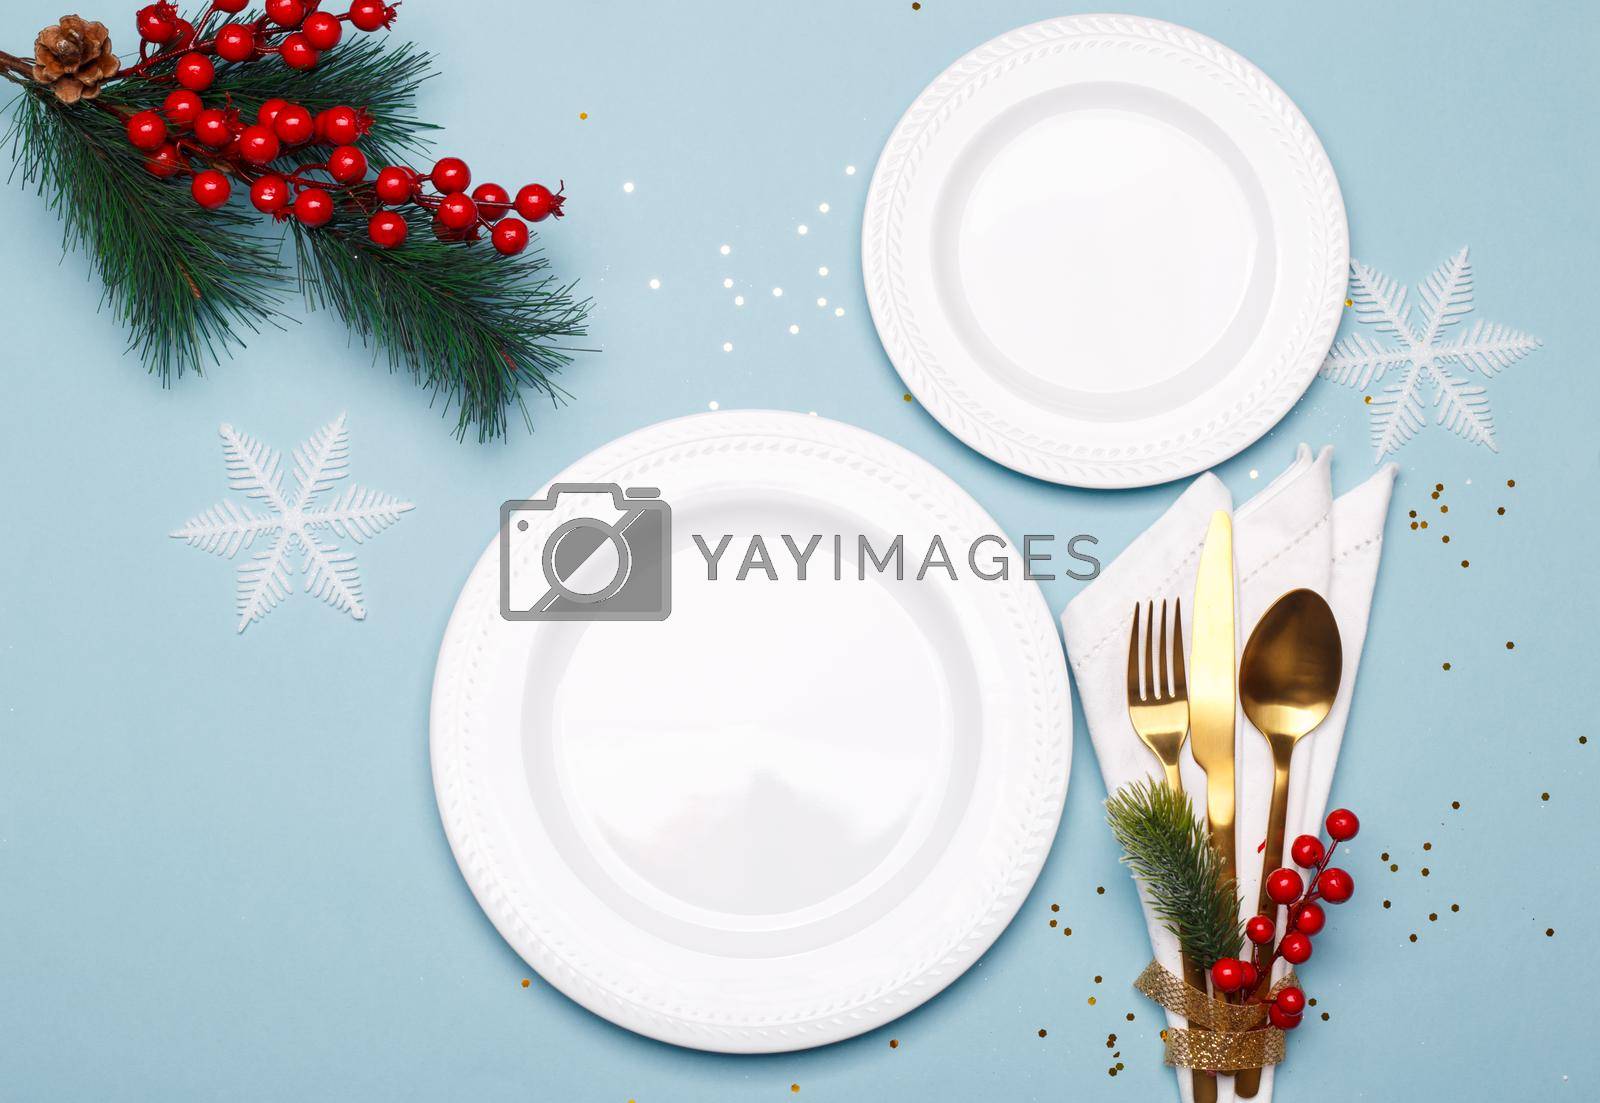 Royalty free image of Christmas or new year table by Lana_M